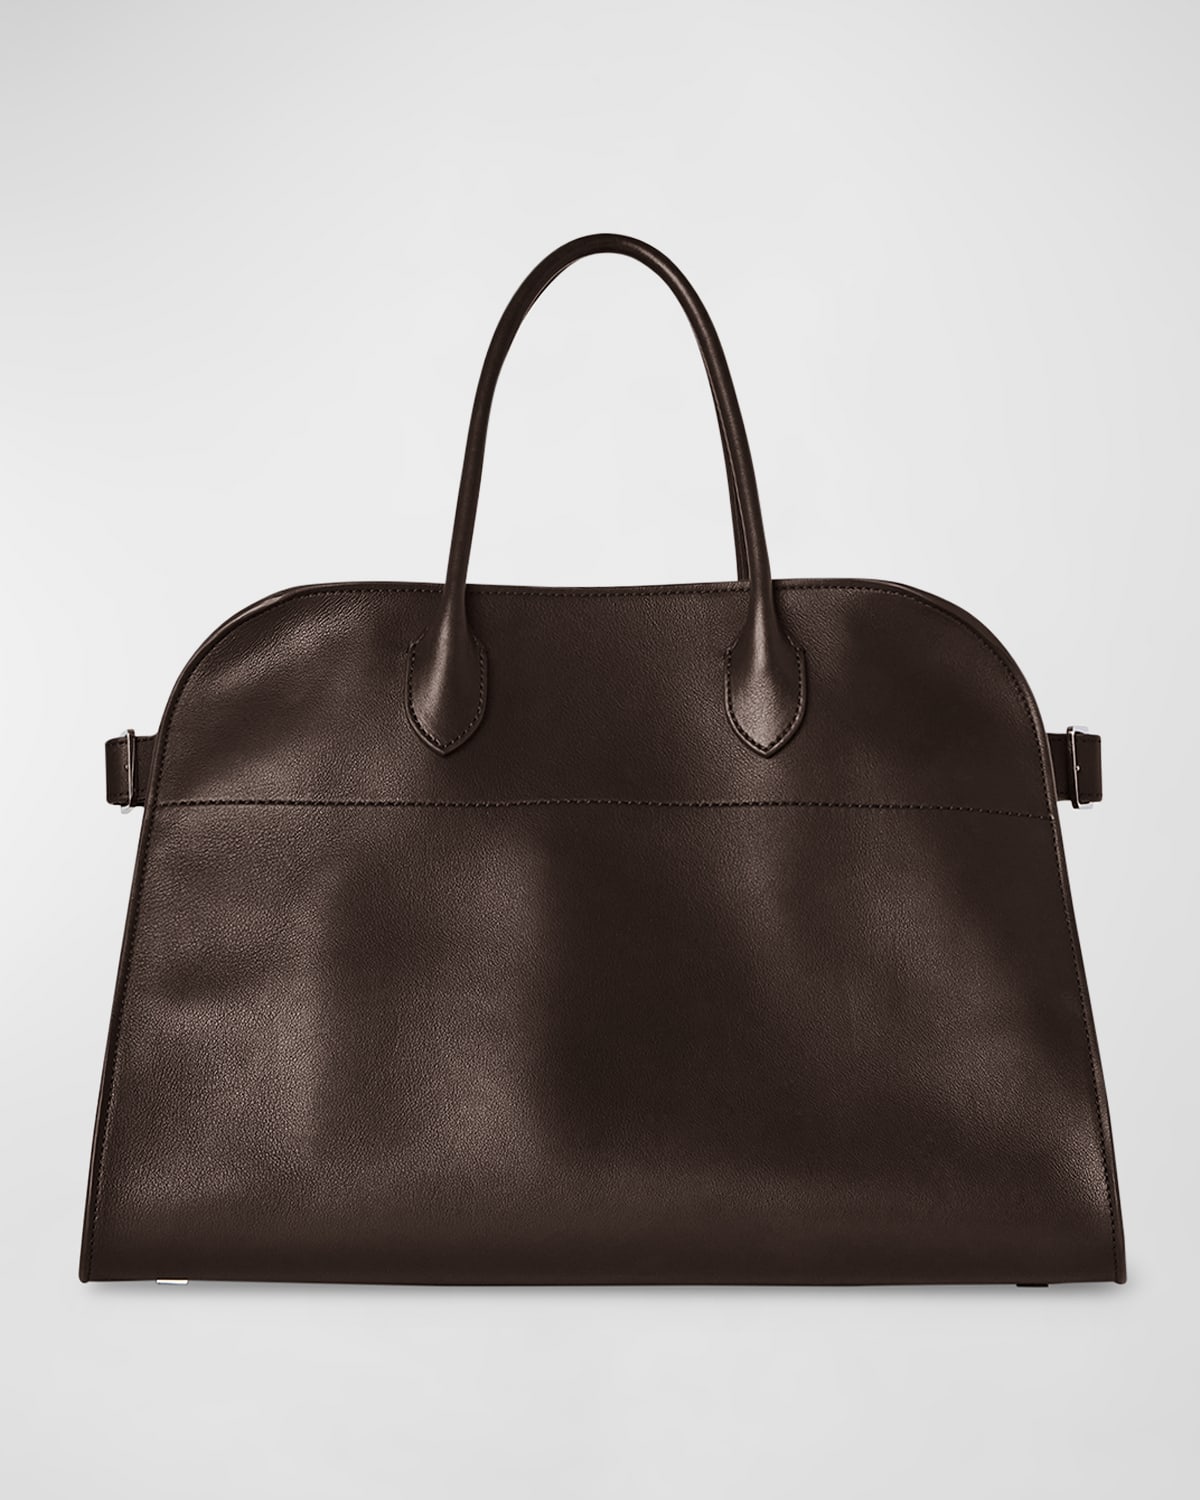 THE ROW MARGAUX 15 AIR BAG IN CALFSKIN LEATHER